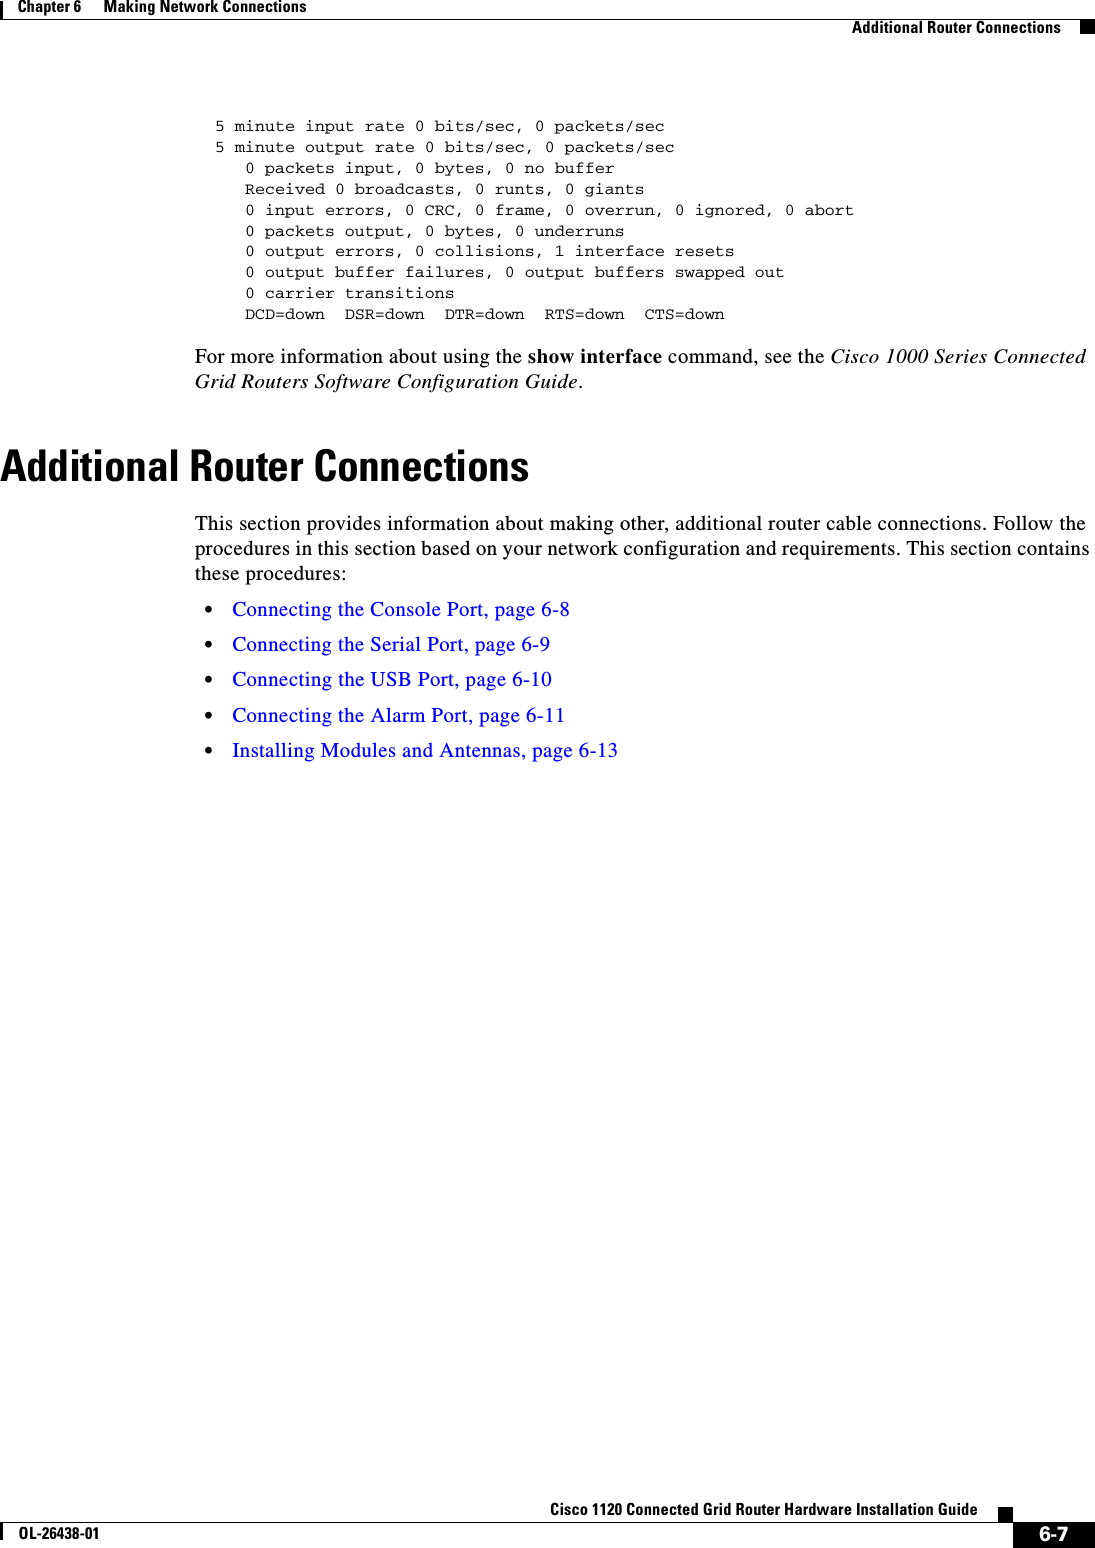  6-7Cisco 1120 Connected Grid Router Hardware Installation GuideOL-26438-01Chapter 6      Making Network Connections  Additional Router Connections  5 minute input rate 0 bits/sec, 0 packets/sec  5 minute output rate 0 bits/sec, 0 packets/sec     0 packets input, 0 bytes, 0 no buffer     Received 0 broadcasts, 0 runts, 0 giants     0 input errors, 0 CRC, 0 frame, 0 overrun, 0 ignored, 0 abort     0 packets output, 0 bytes, 0 underruns     0 output errors, 0 collisions, 1 interface resets     0 output buffer failures, 0 output buffers swapped out     0 carrier transitions     DCD=down  DSR=down  DTR=down  RTS=down  CTS=downFor more information about using the show interface command, see the Cisco 1000 Series Connected Grid Routers Software Configuration Guide.Additional Router ConnectionsThis section provides information about making other, additional router cable connections. Follow the procedures in this section based on your network configuration and requirements. This section contains these procedures:•Connecting the Console Port, page 6-8•Connecting the Serial Port, page 6-9•Connecting the USB Port, page 6-10•Connecting the Alarm Port, page 6-11•Installing Modules and Antennas, page 6-13